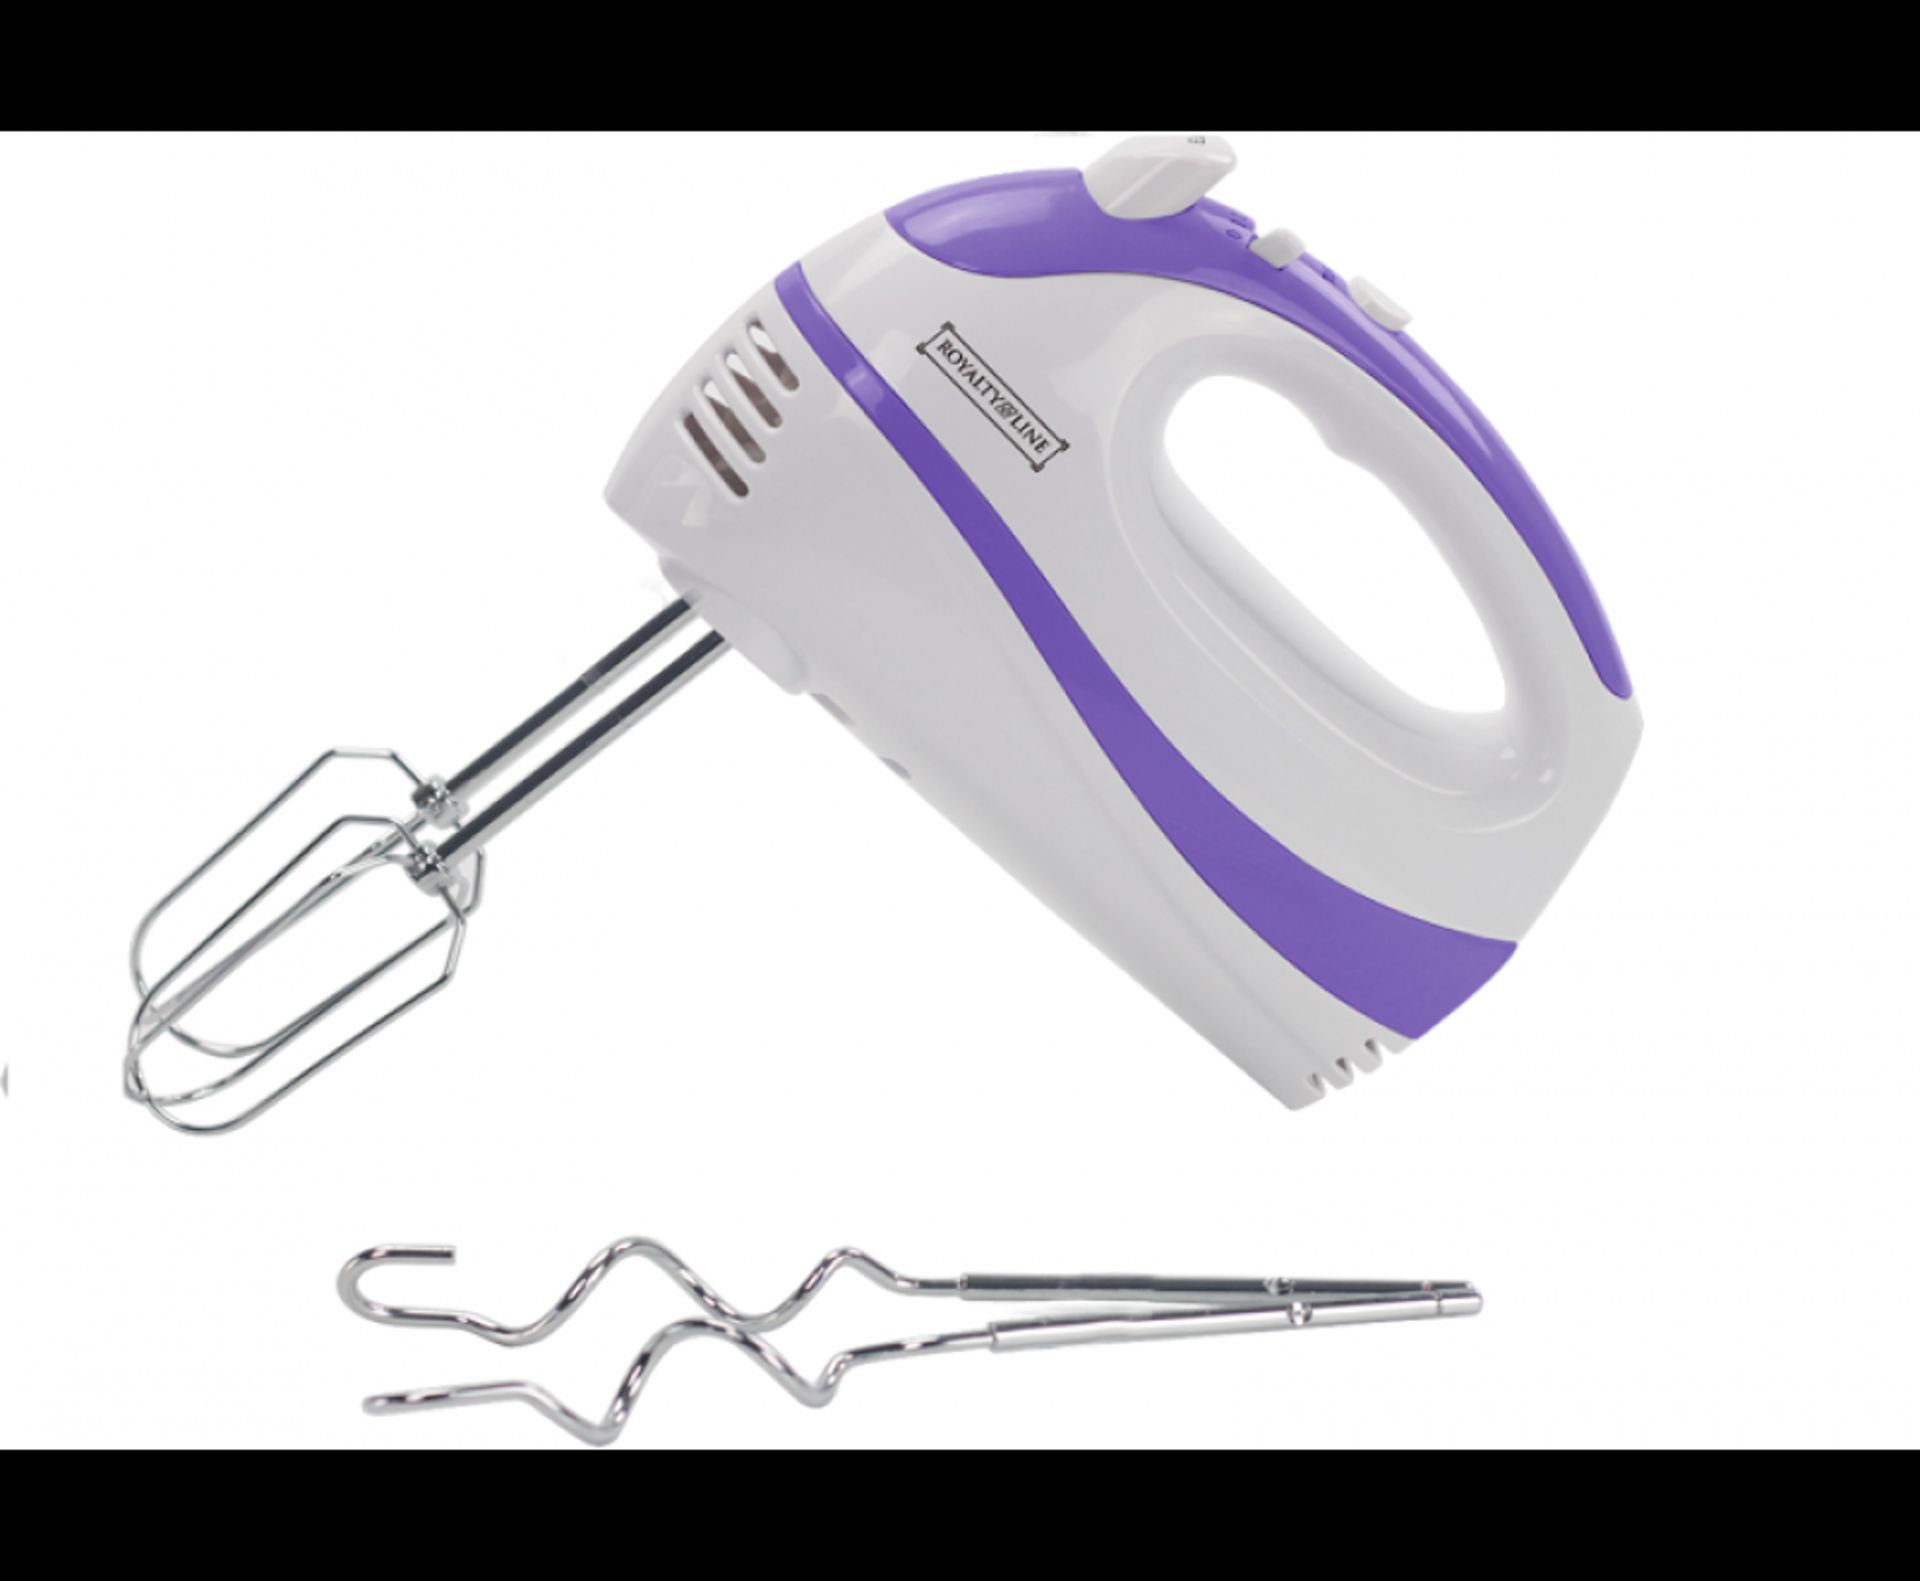 V *TRADE QTY* Brand New 200w Hand Mixer X 4 YOUR BID PRICE TO BE MULTIPLIED BY FOUR